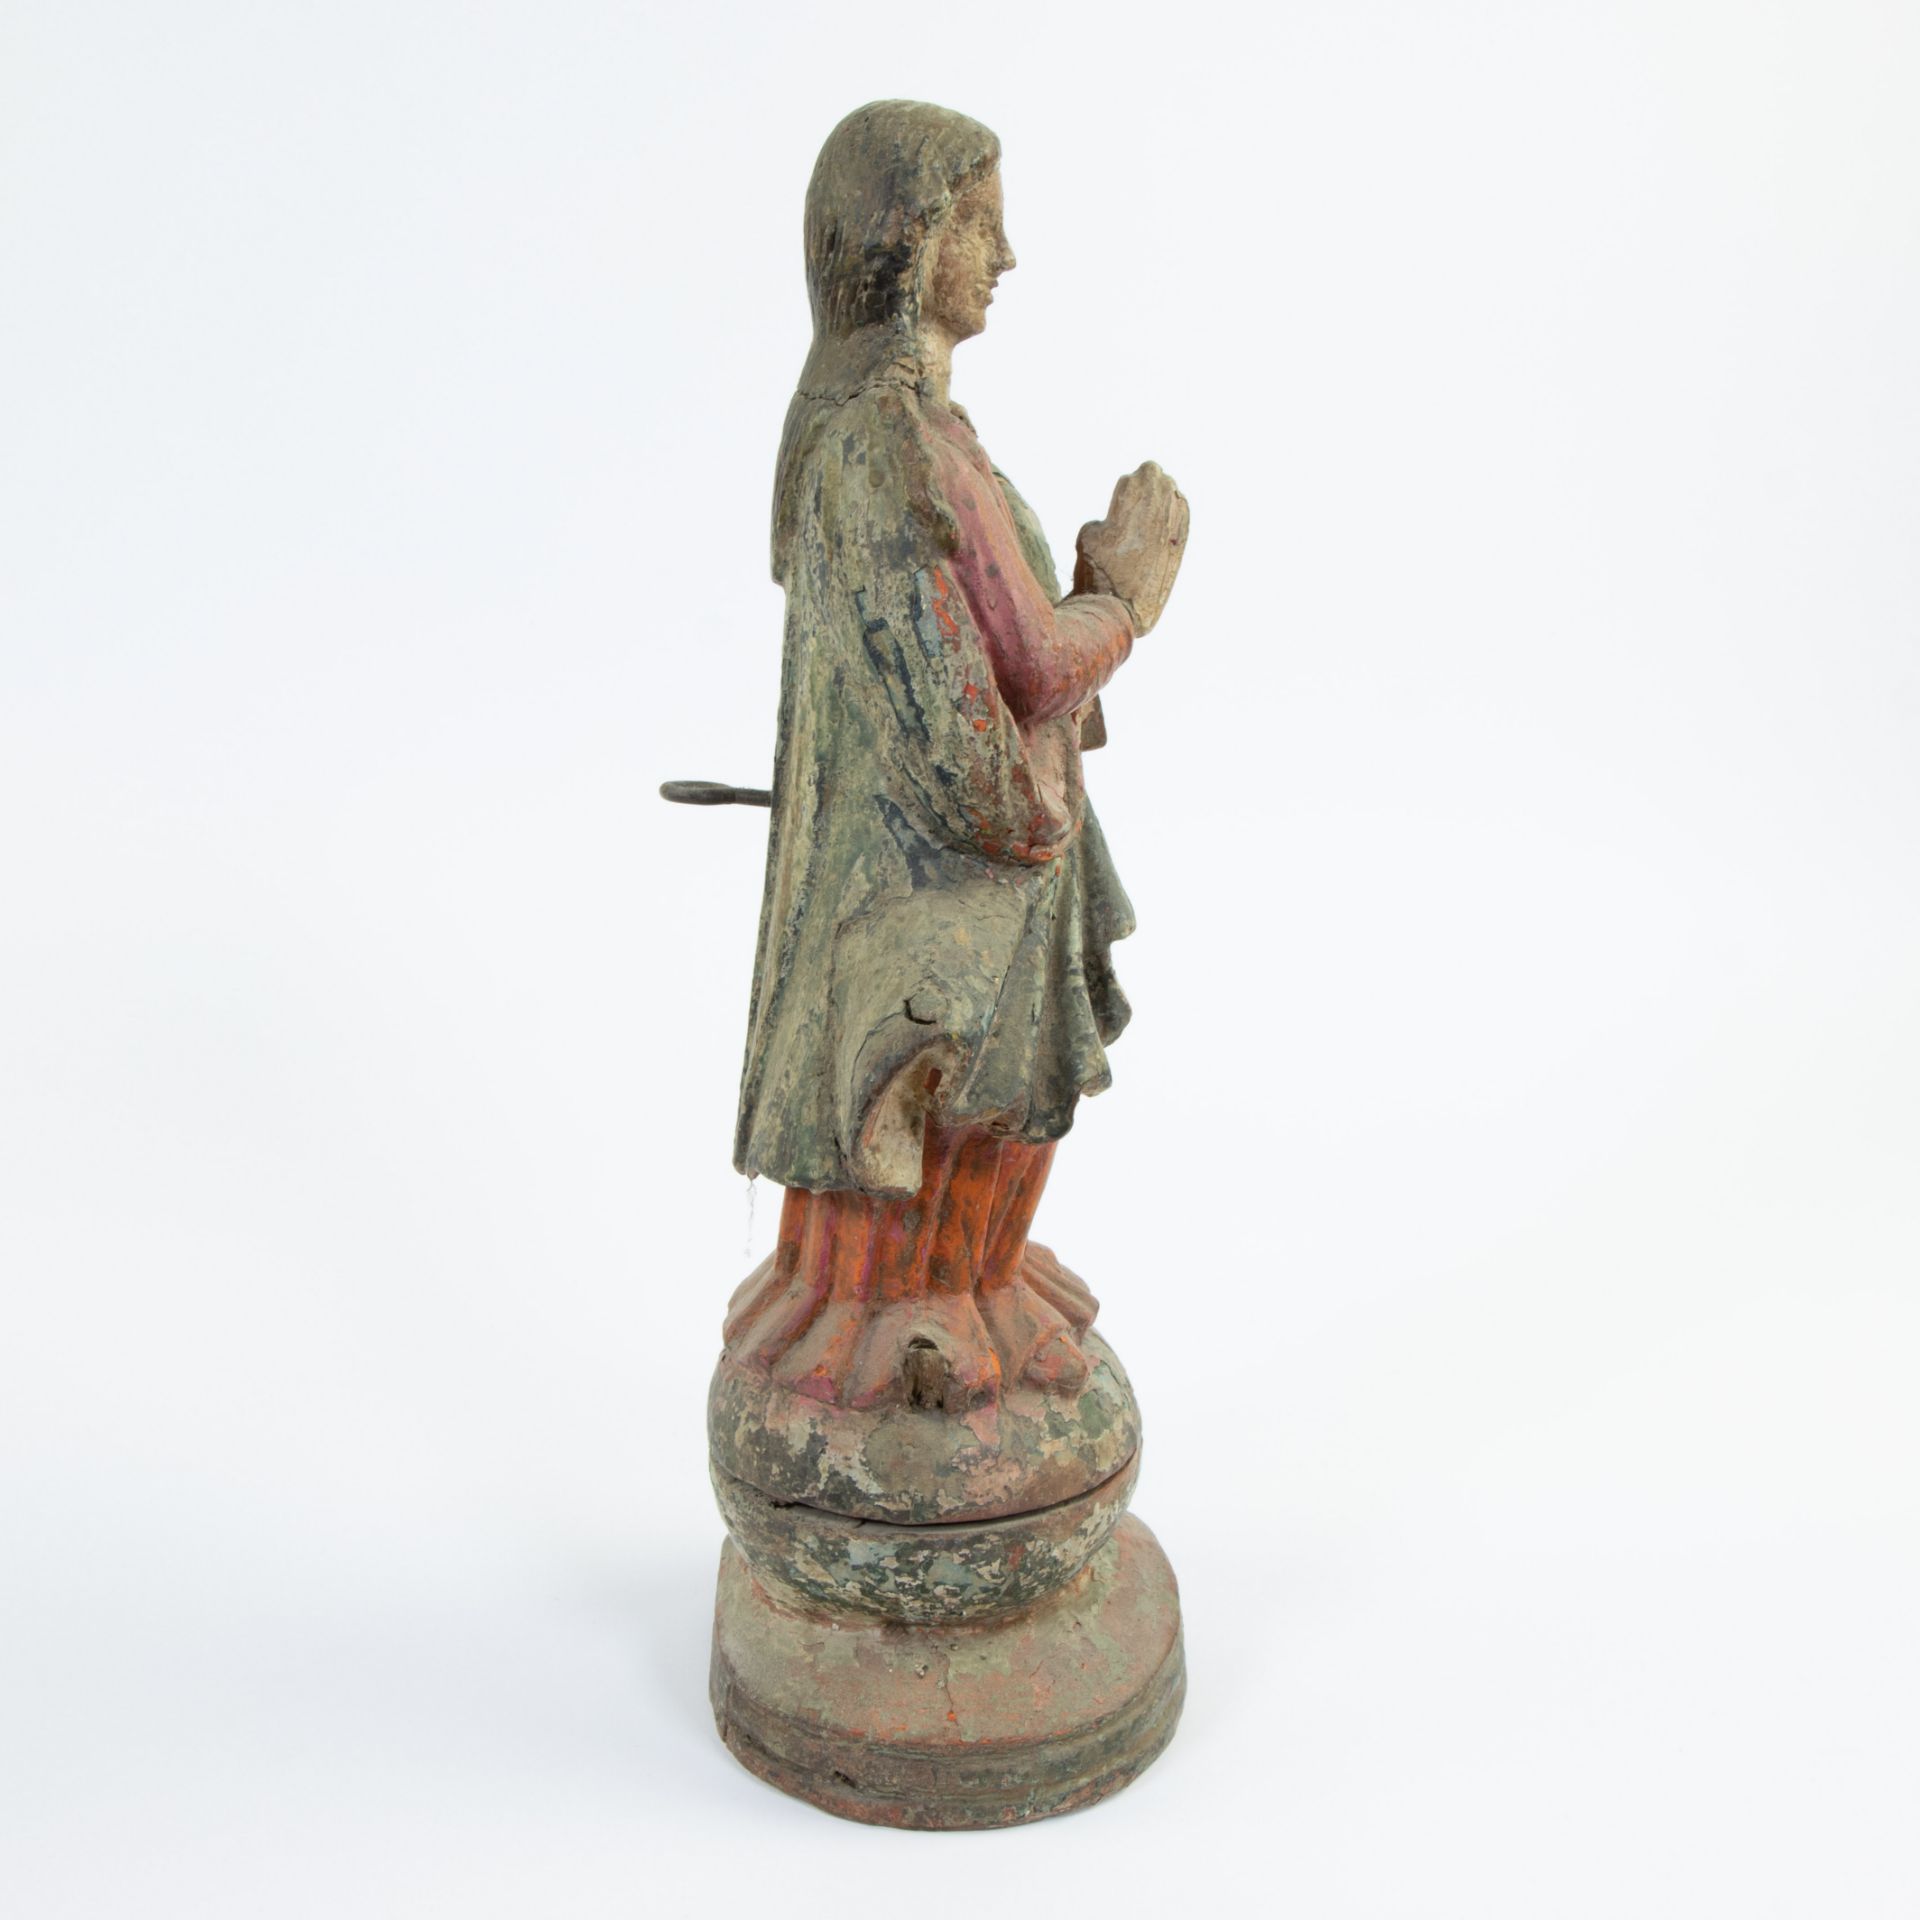 Wooden statue Madonna with original polychromy, Spanish or South America, 18th century - Image 4 of 4